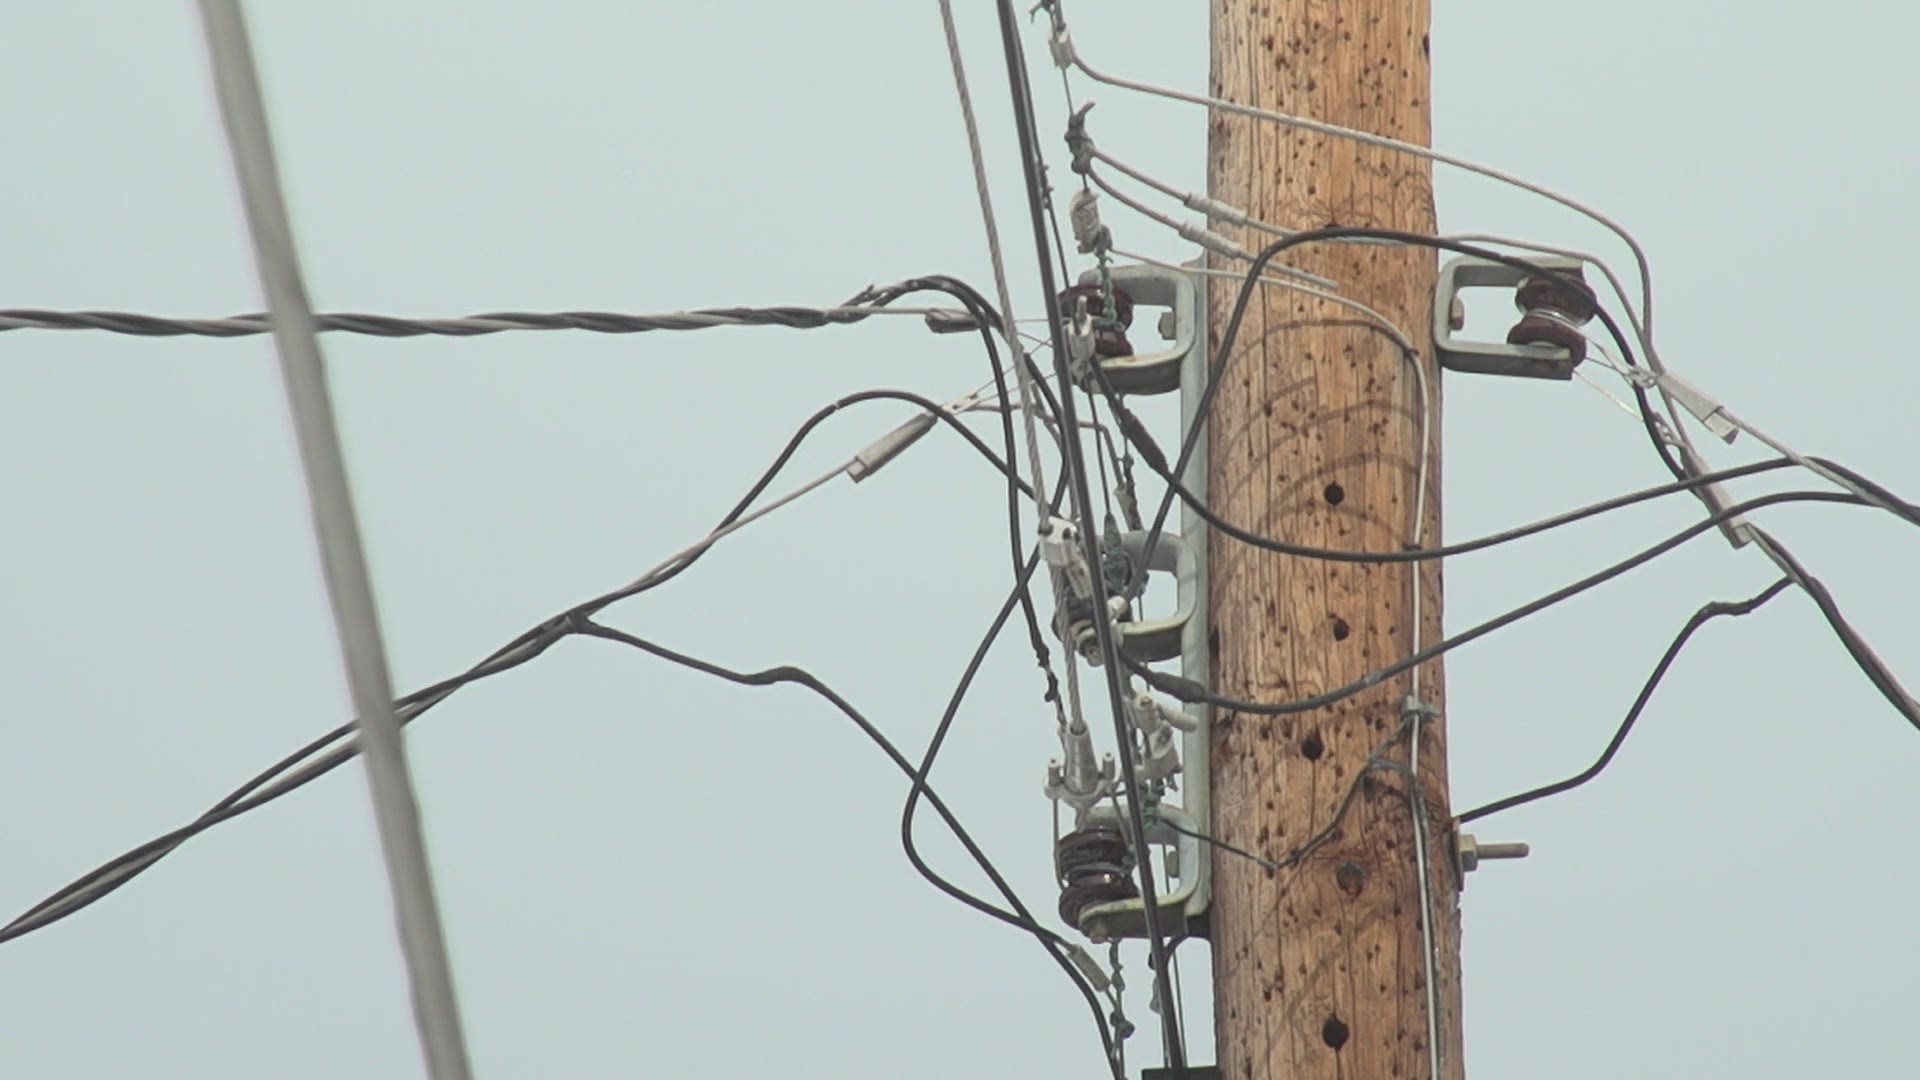 ERCOT says power has been restored but rolling outages are still possible, depending on supply and demand.